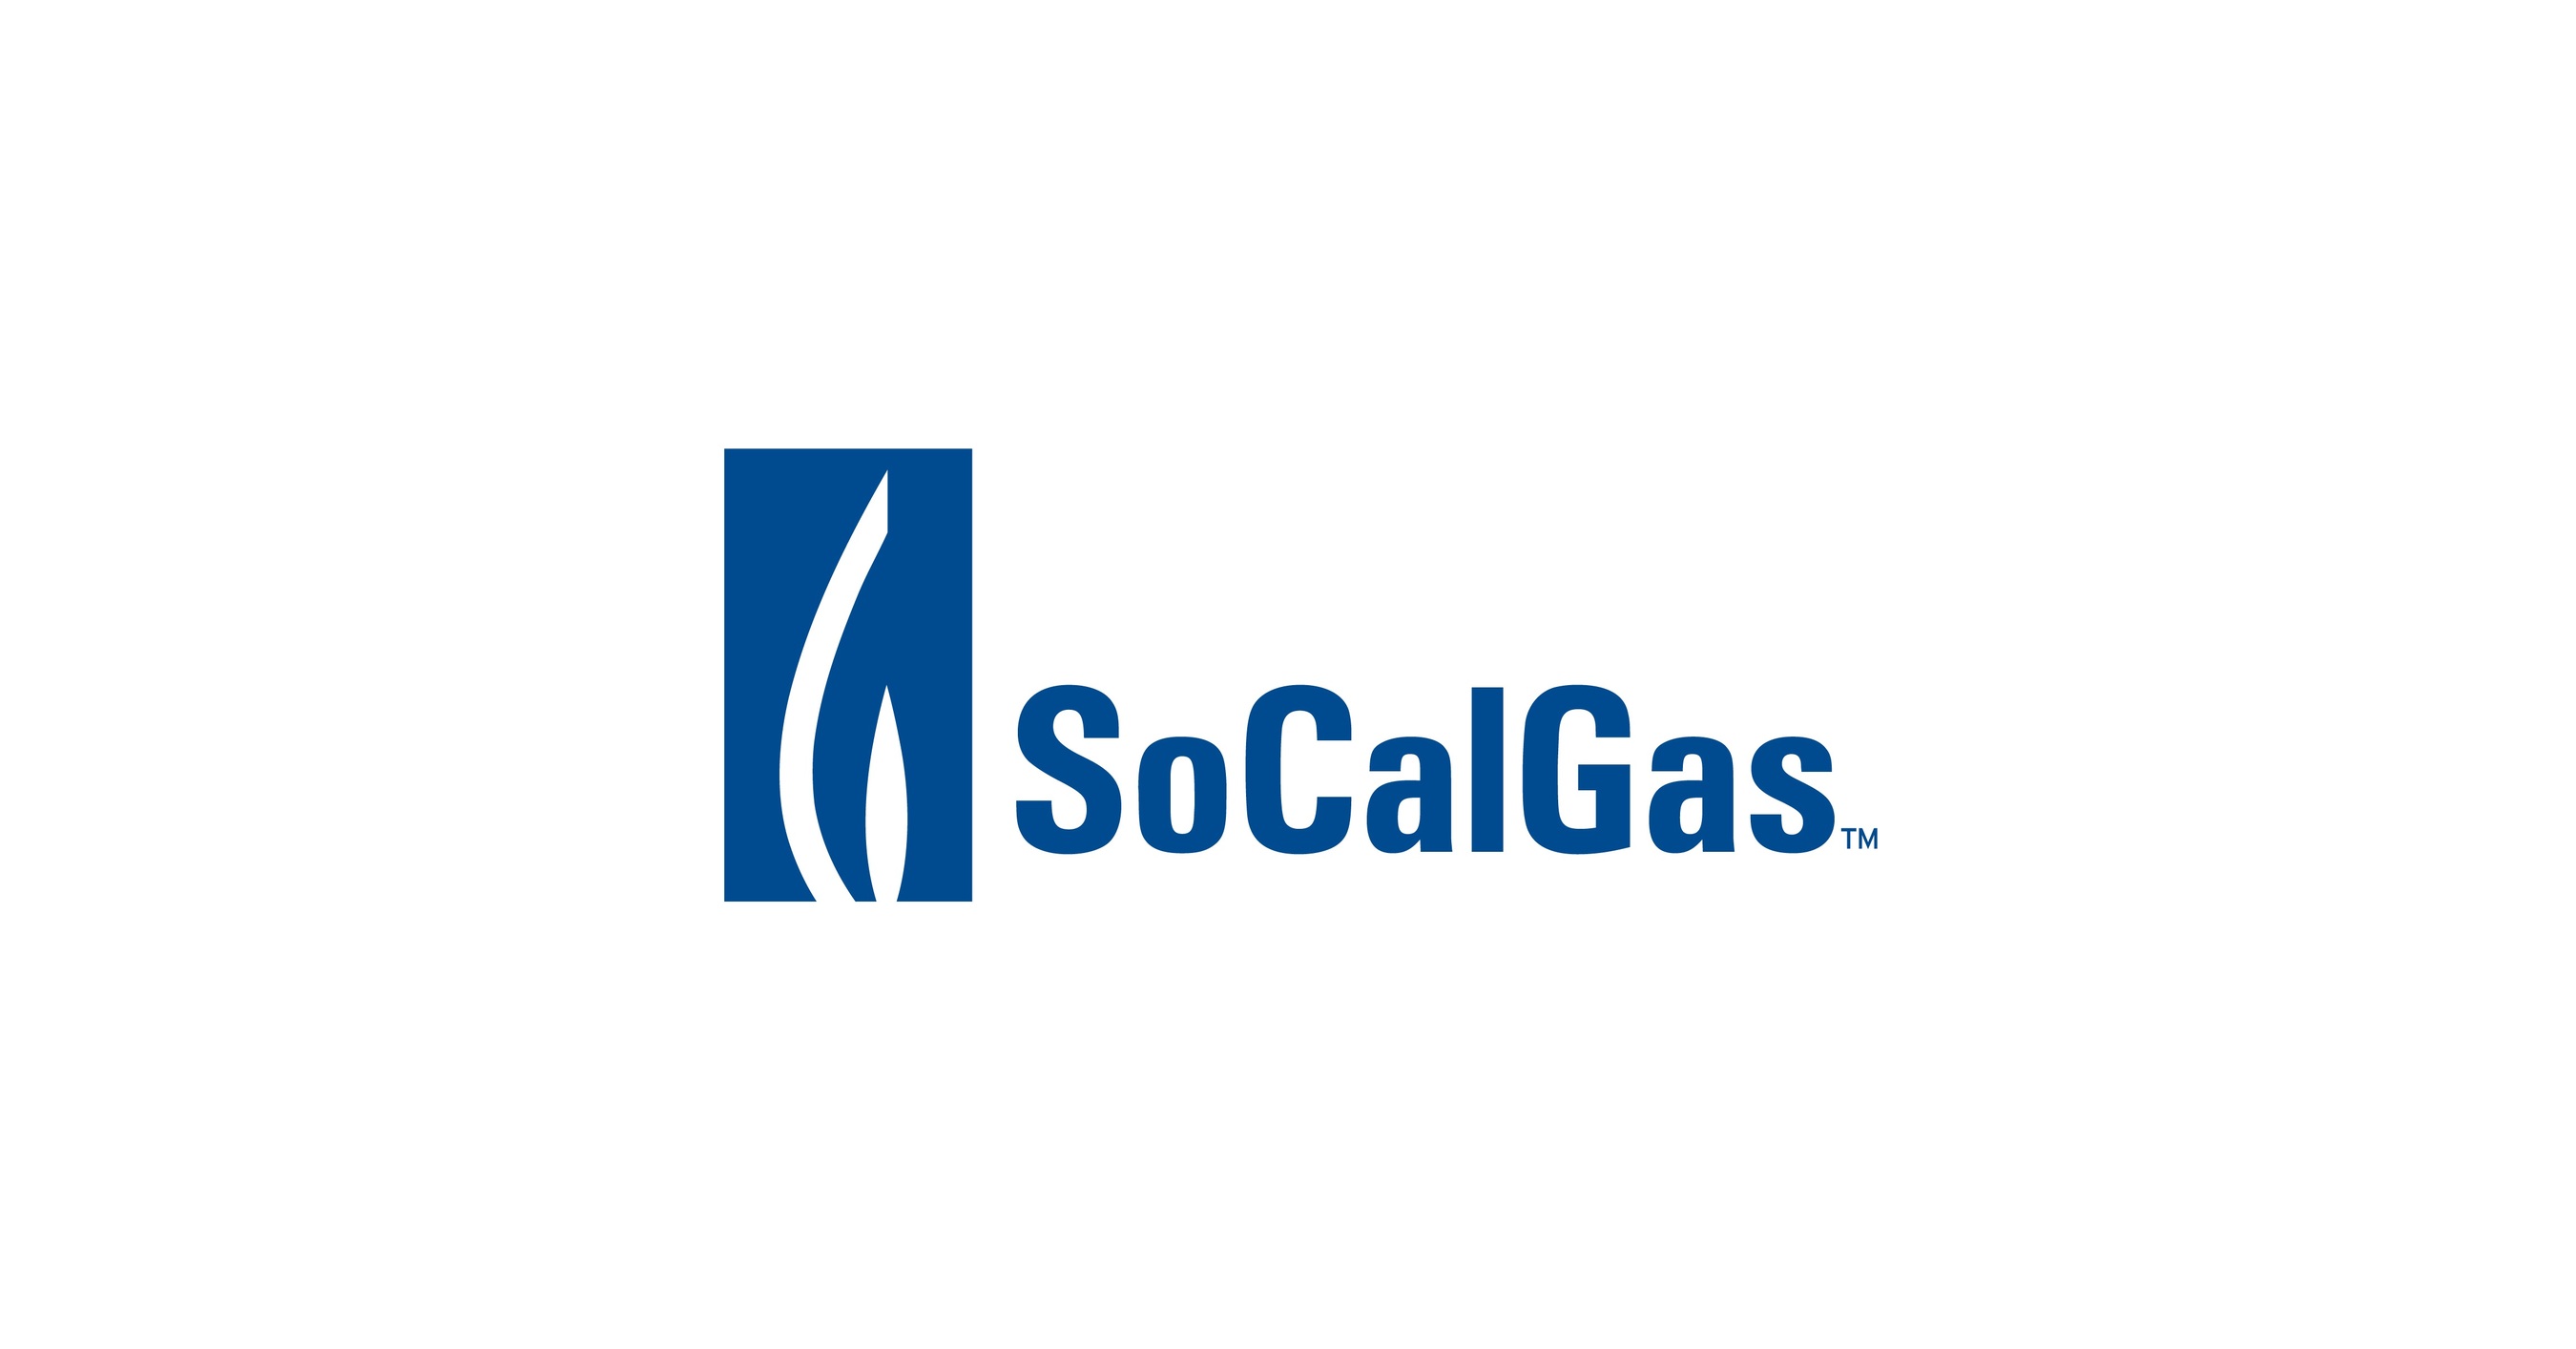 TELACU and SoCalGas Announce $50,000 in Scholarships for Latino Students Pursuing Careers in STEM